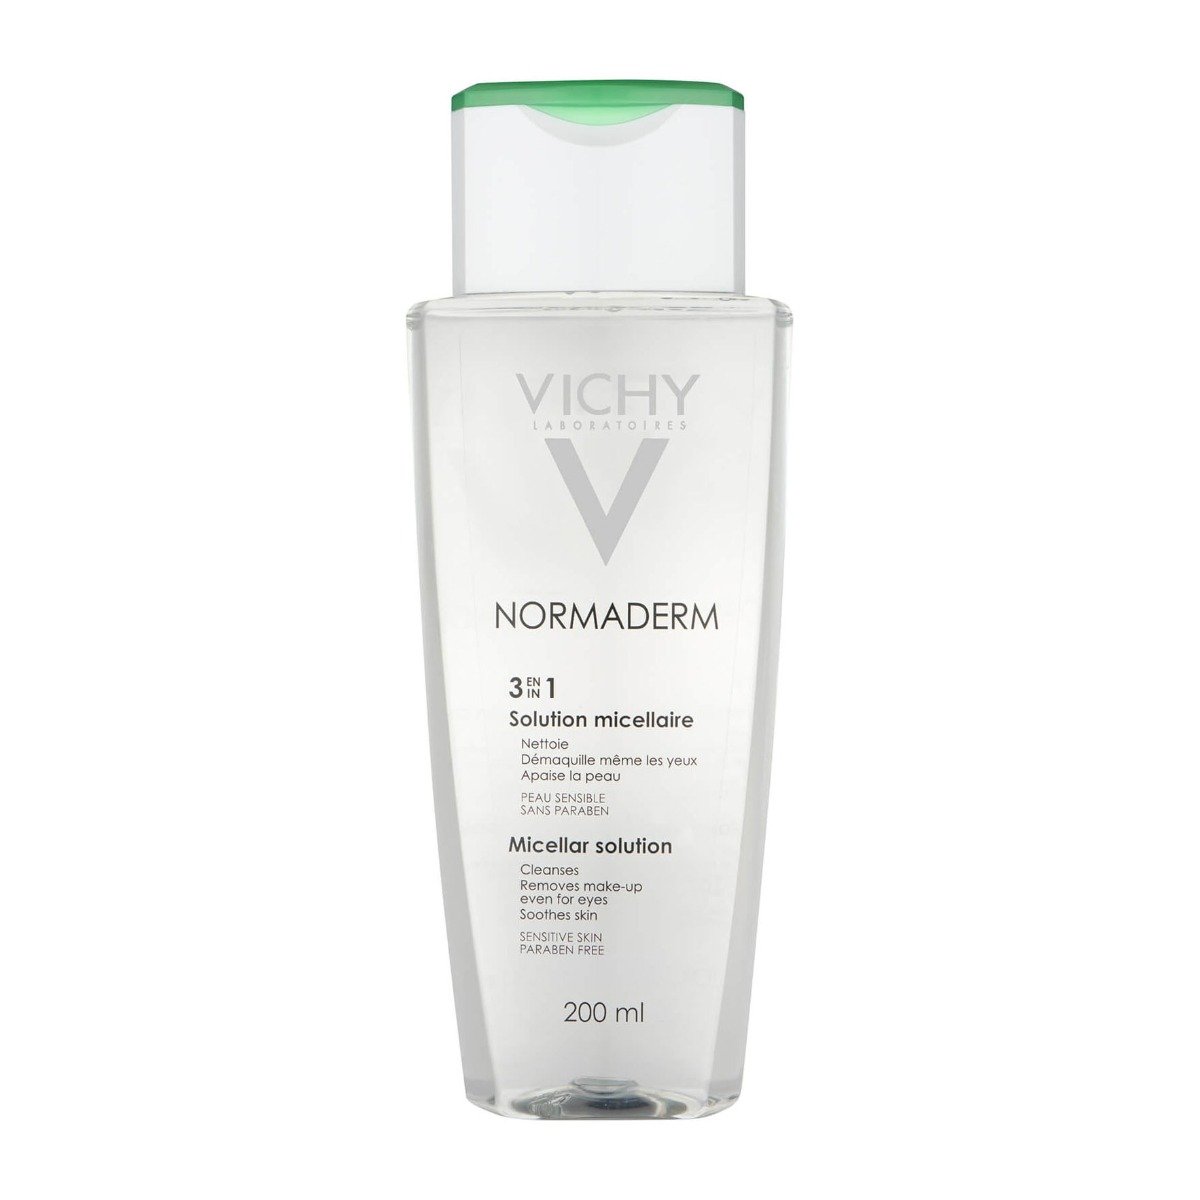 Vichy Normaderm Micellar Solution 200ml - Bloom Pharmacy